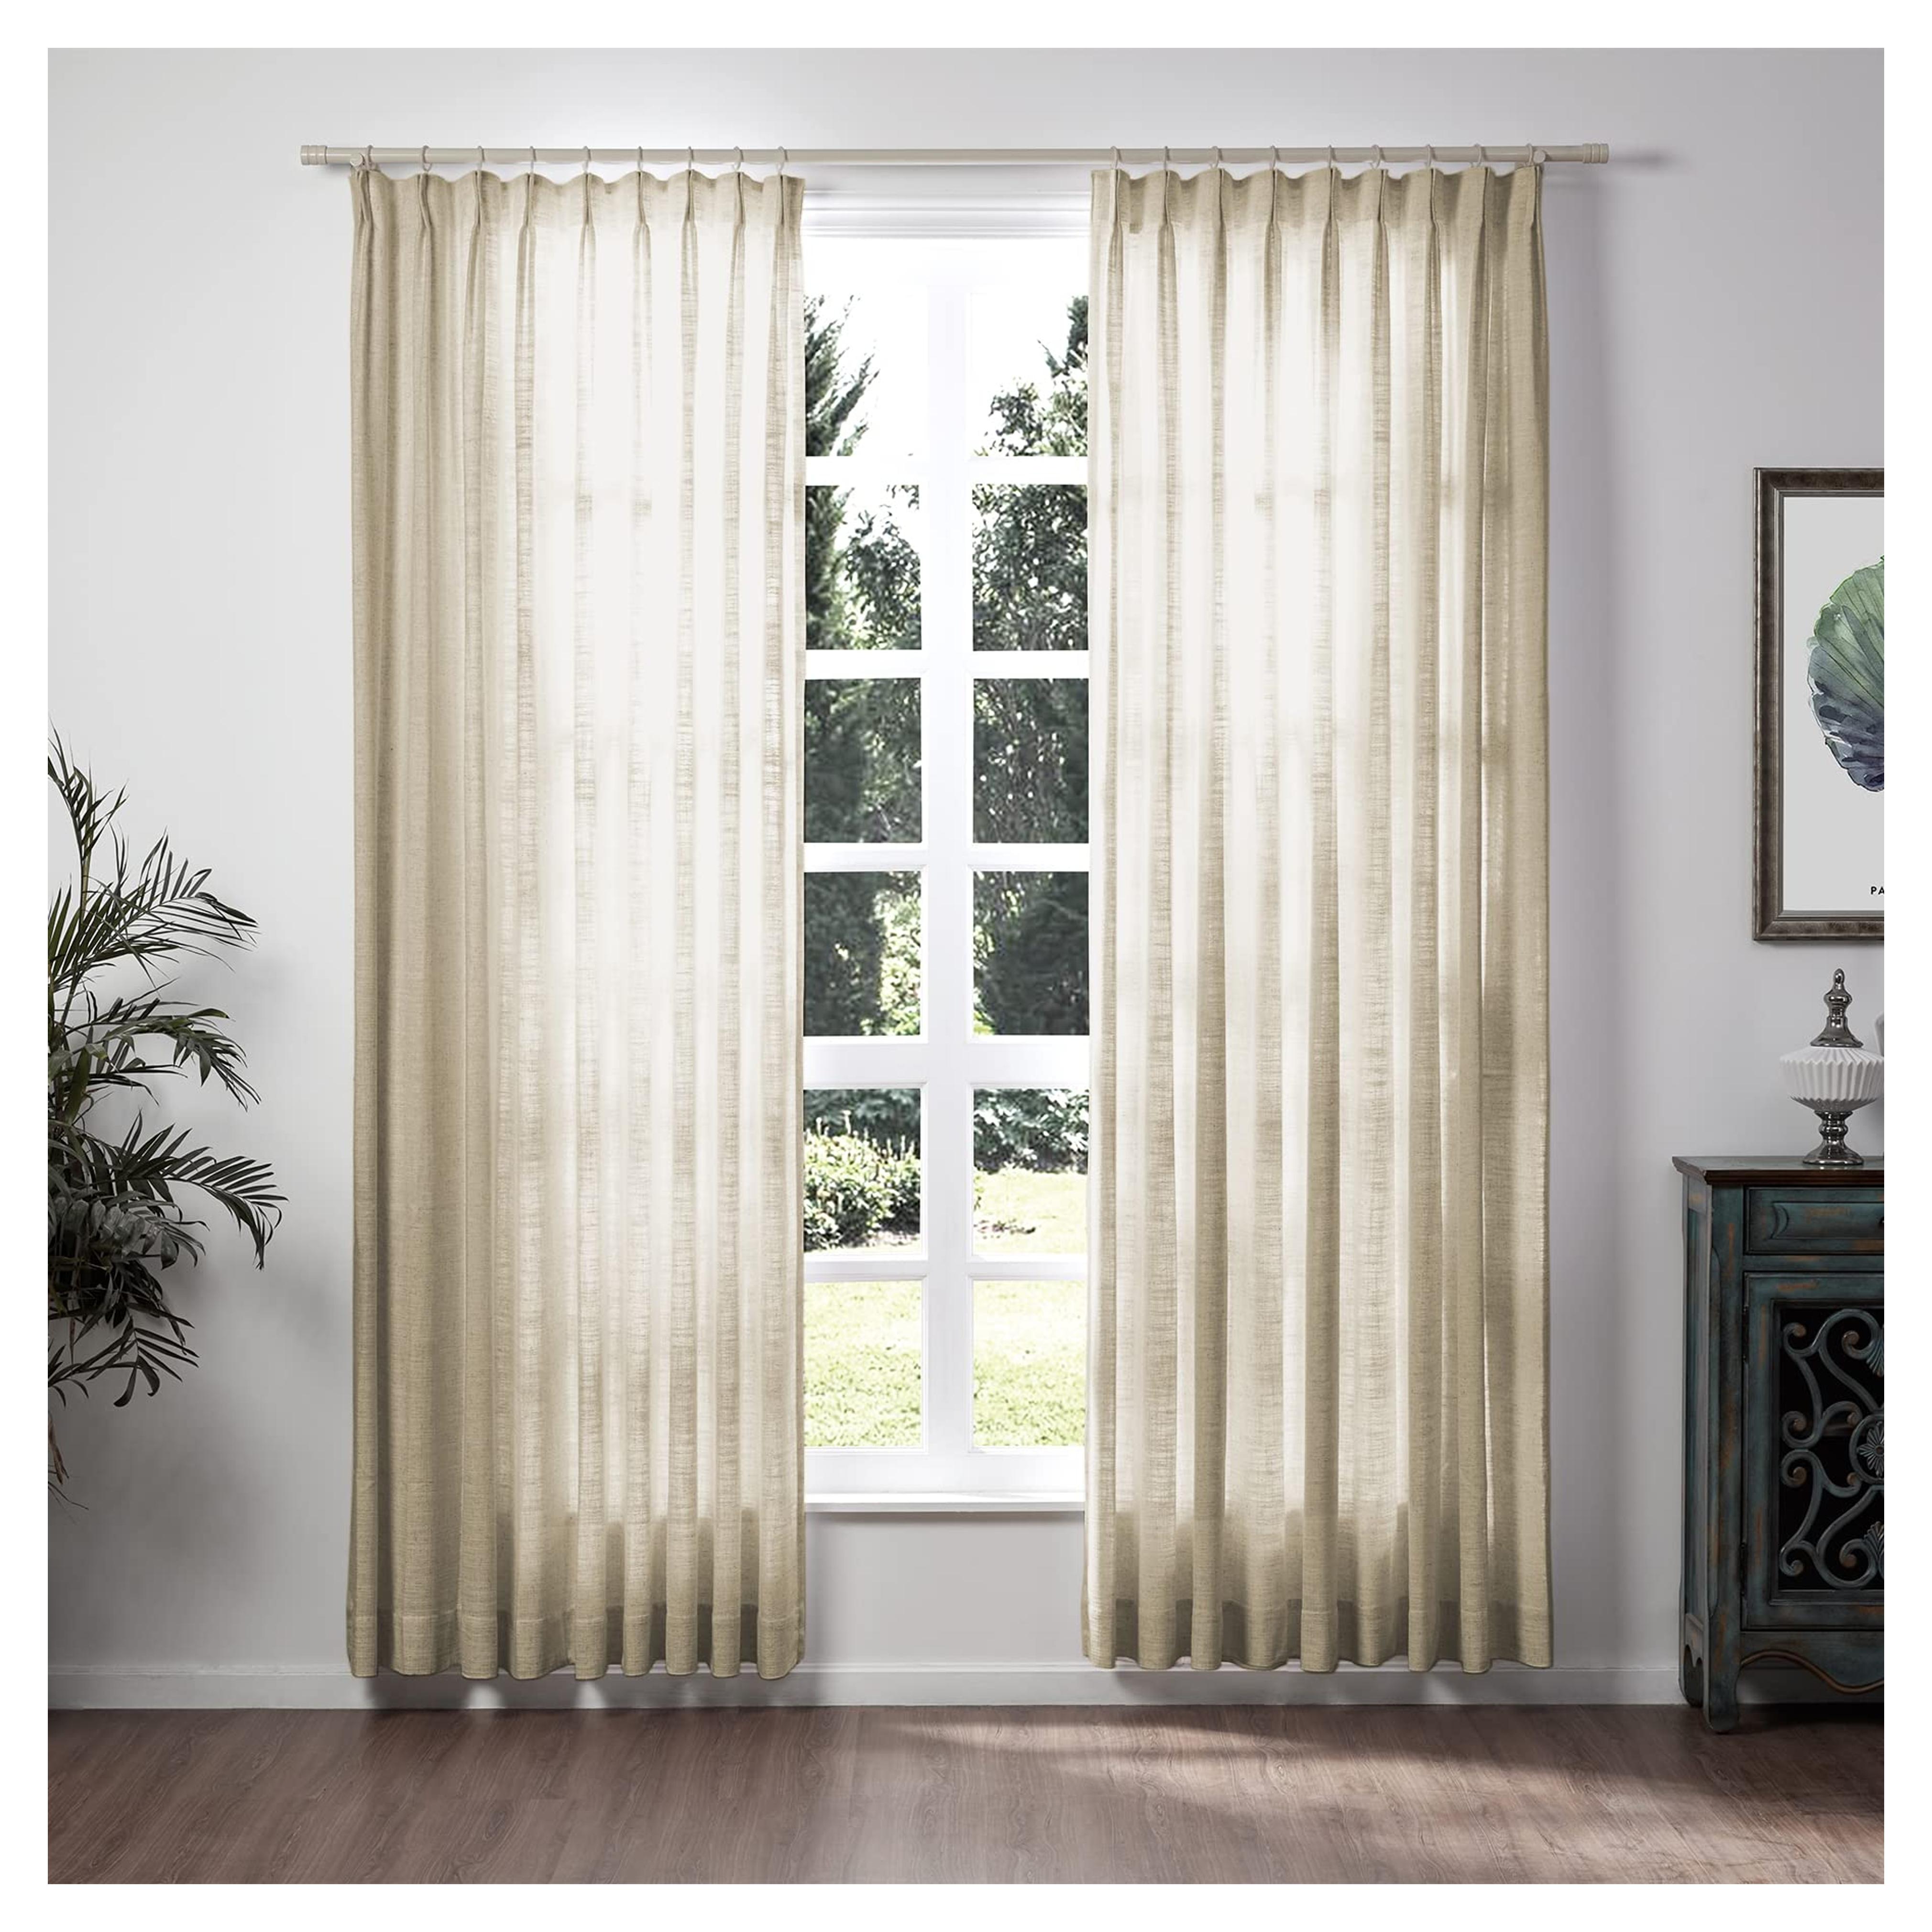 Amazon.com: TWOPAGES 52 W x 63 L inch Pinch Pleat Unlined Darkening Drape Faux Linen Curtain Drapery Panel for Living Room Bedroom Meetingroom Club Theater Patio Door (1 Panel),Taupe Grey : Home & Kitchen